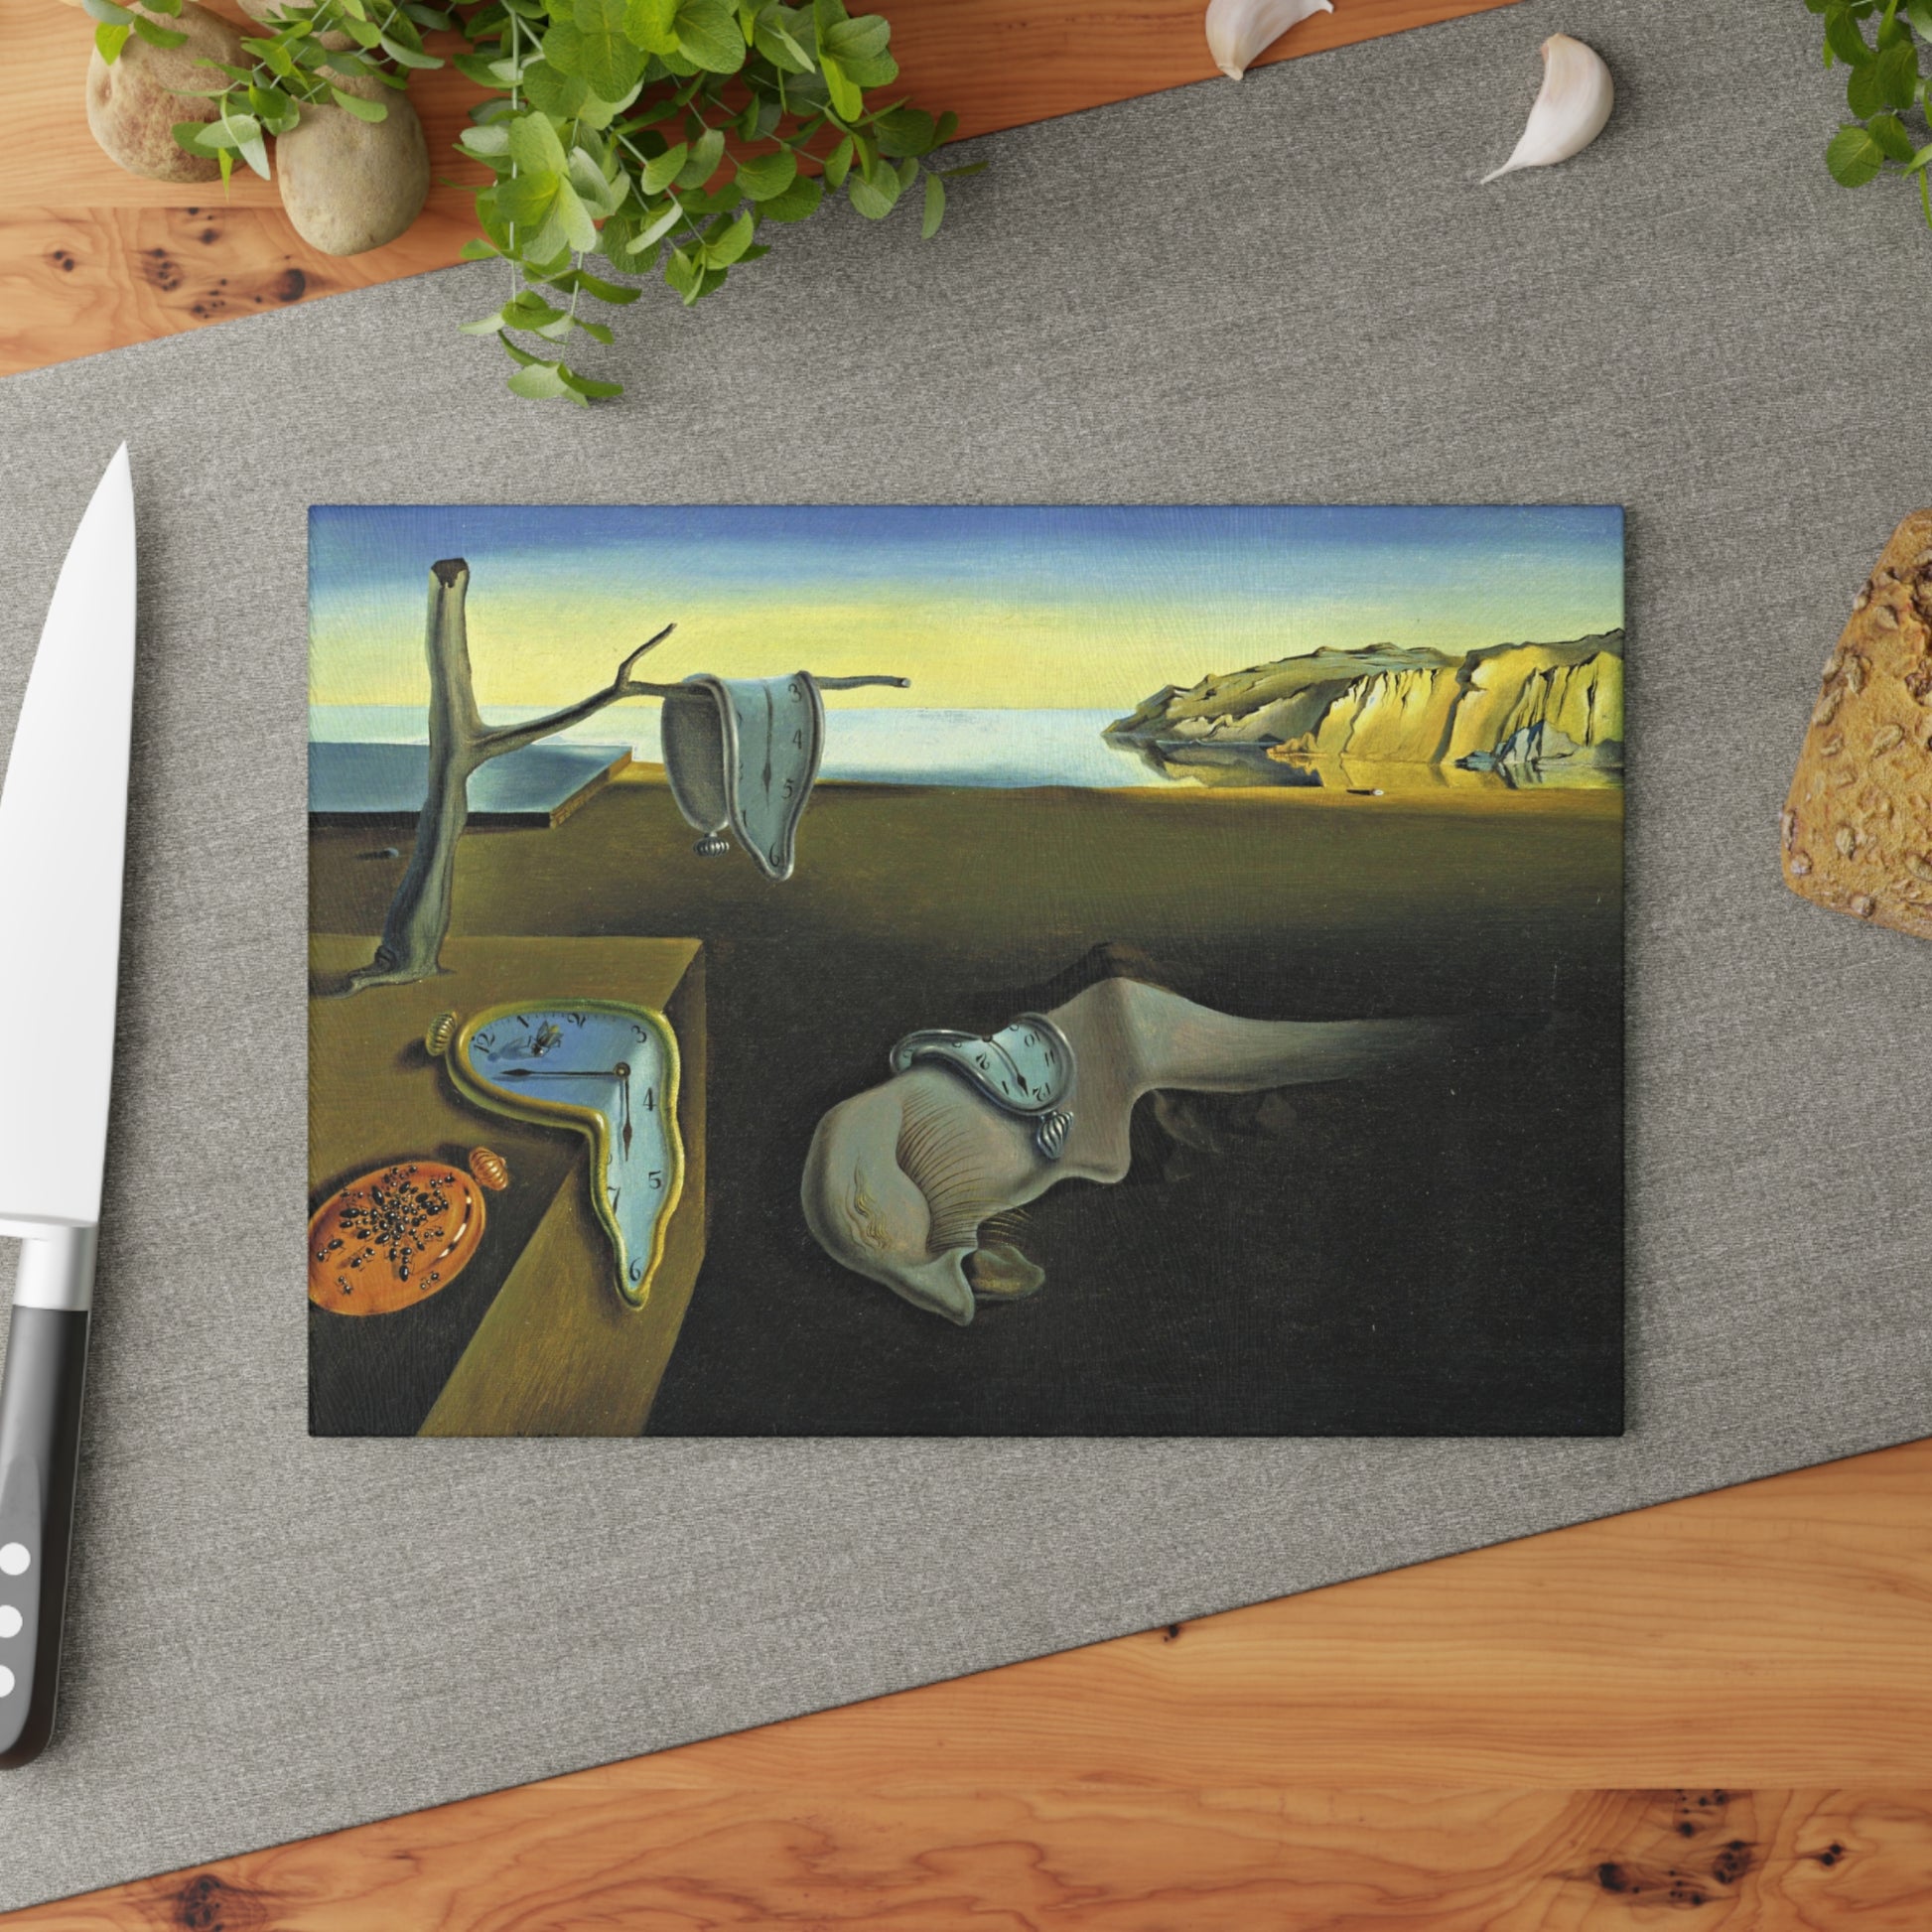 SALVADOR DALI - THE PERSISTENCE OF TIME- ART GLASS CUTTING BOARD